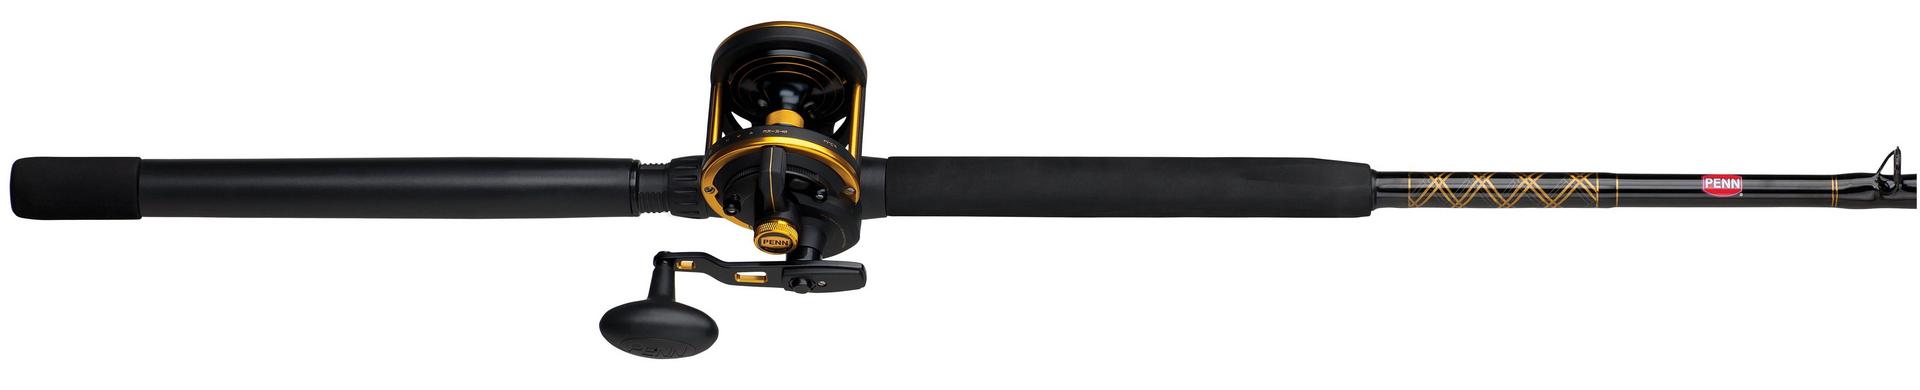 PENN Squall® Lever Drag Conventional Rod & Reel Combo